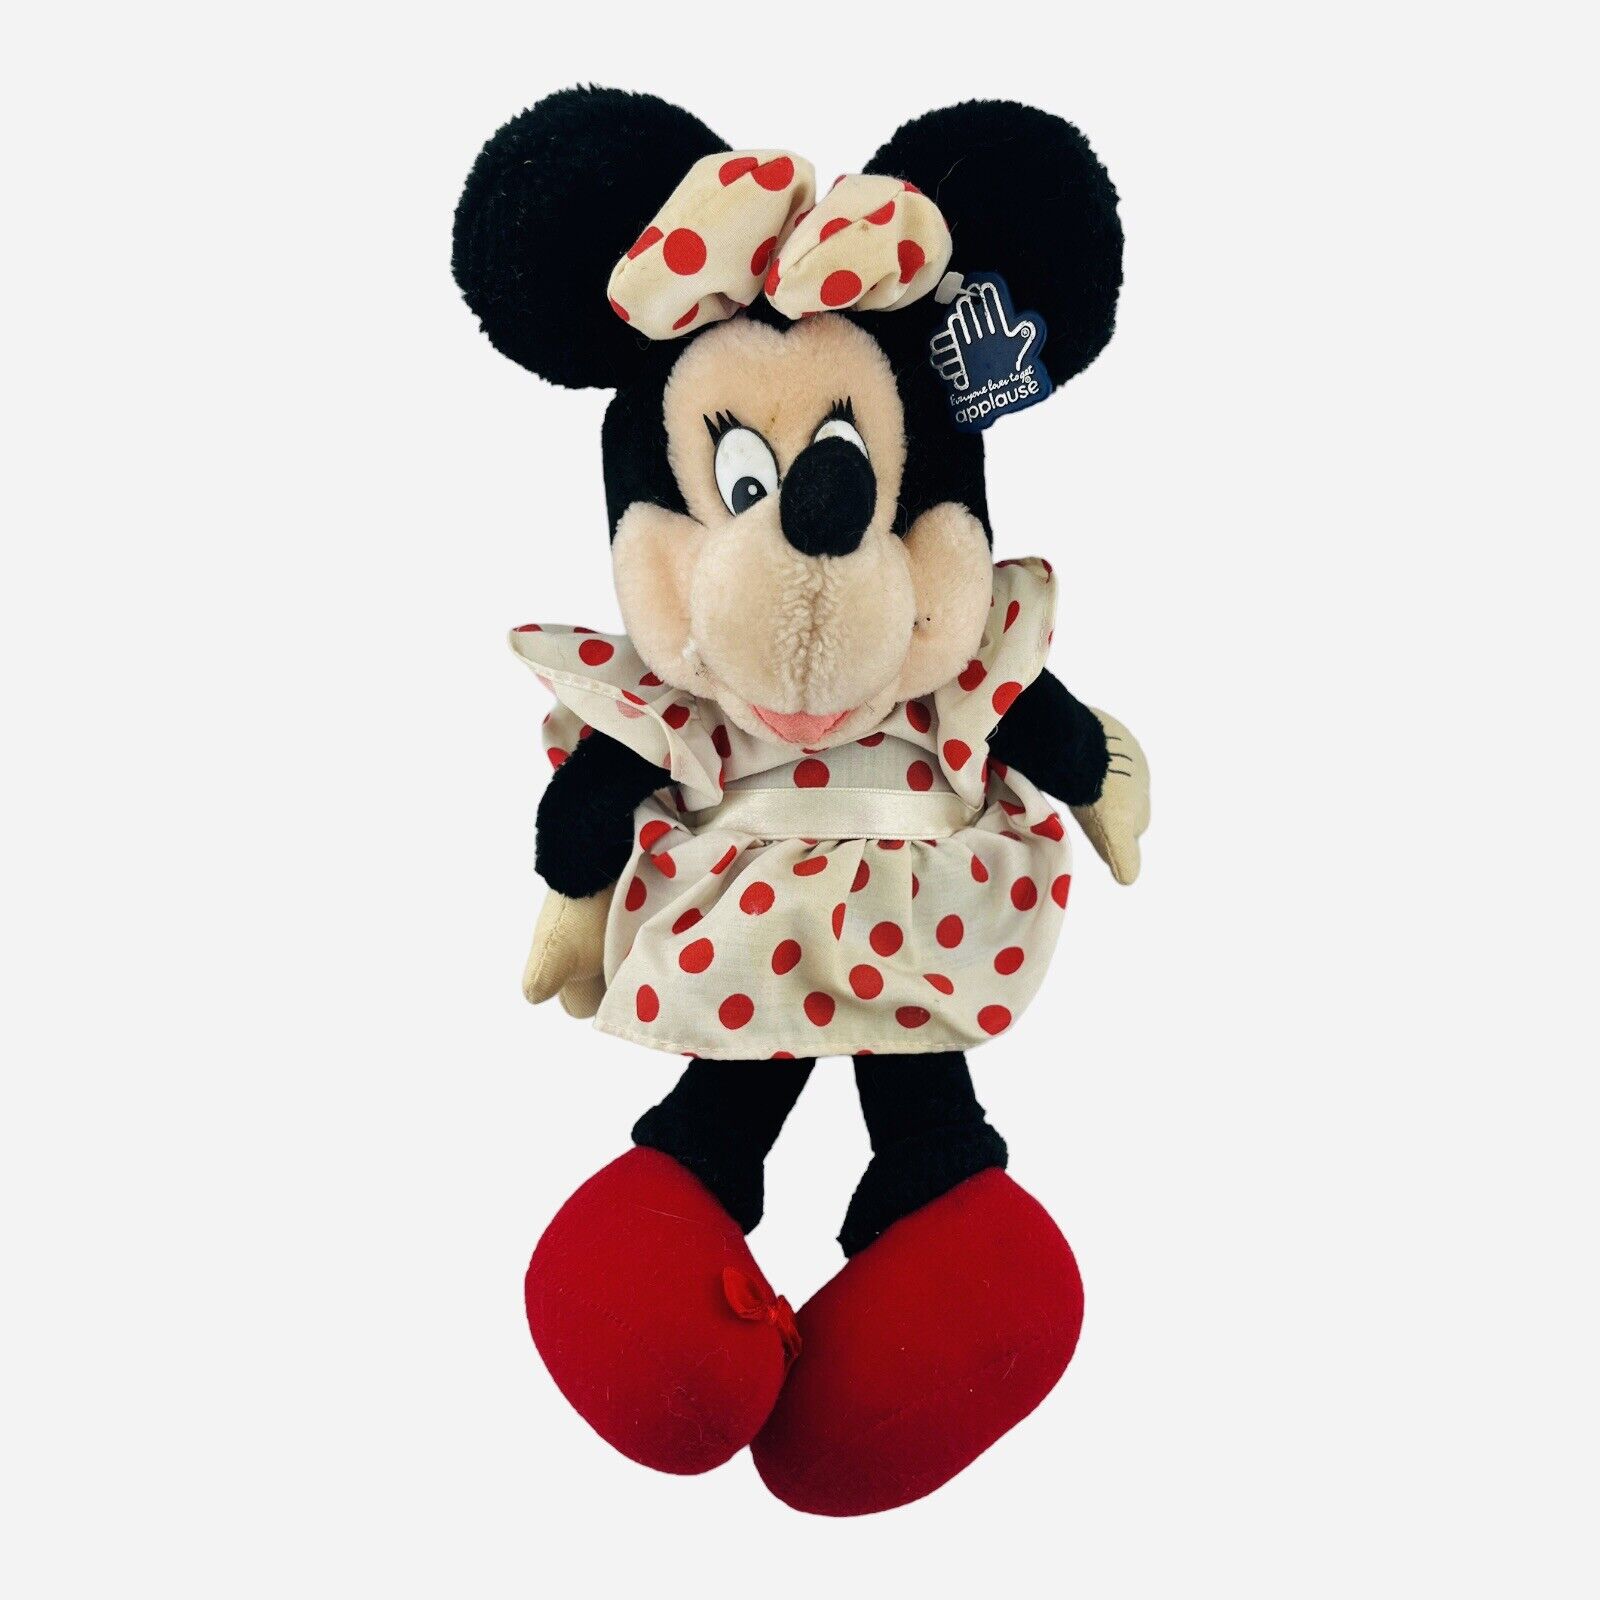 Vintage Applause Minnie Mouse Plush Doll With Tag